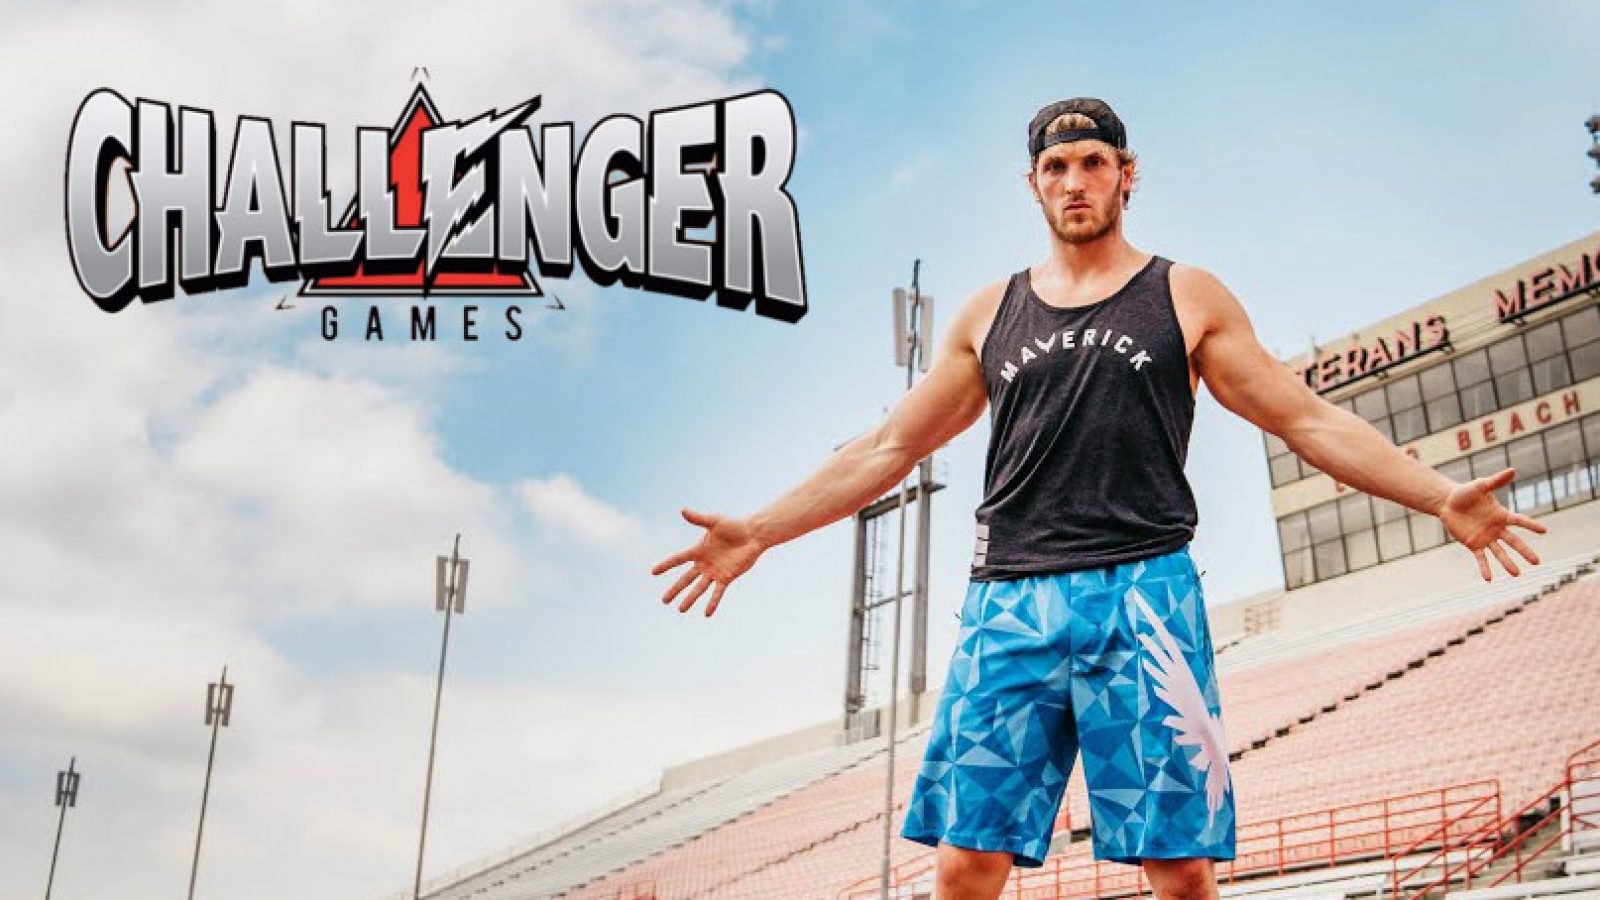 How to watch Logan Paul's “Challenger Games” – Stream, time